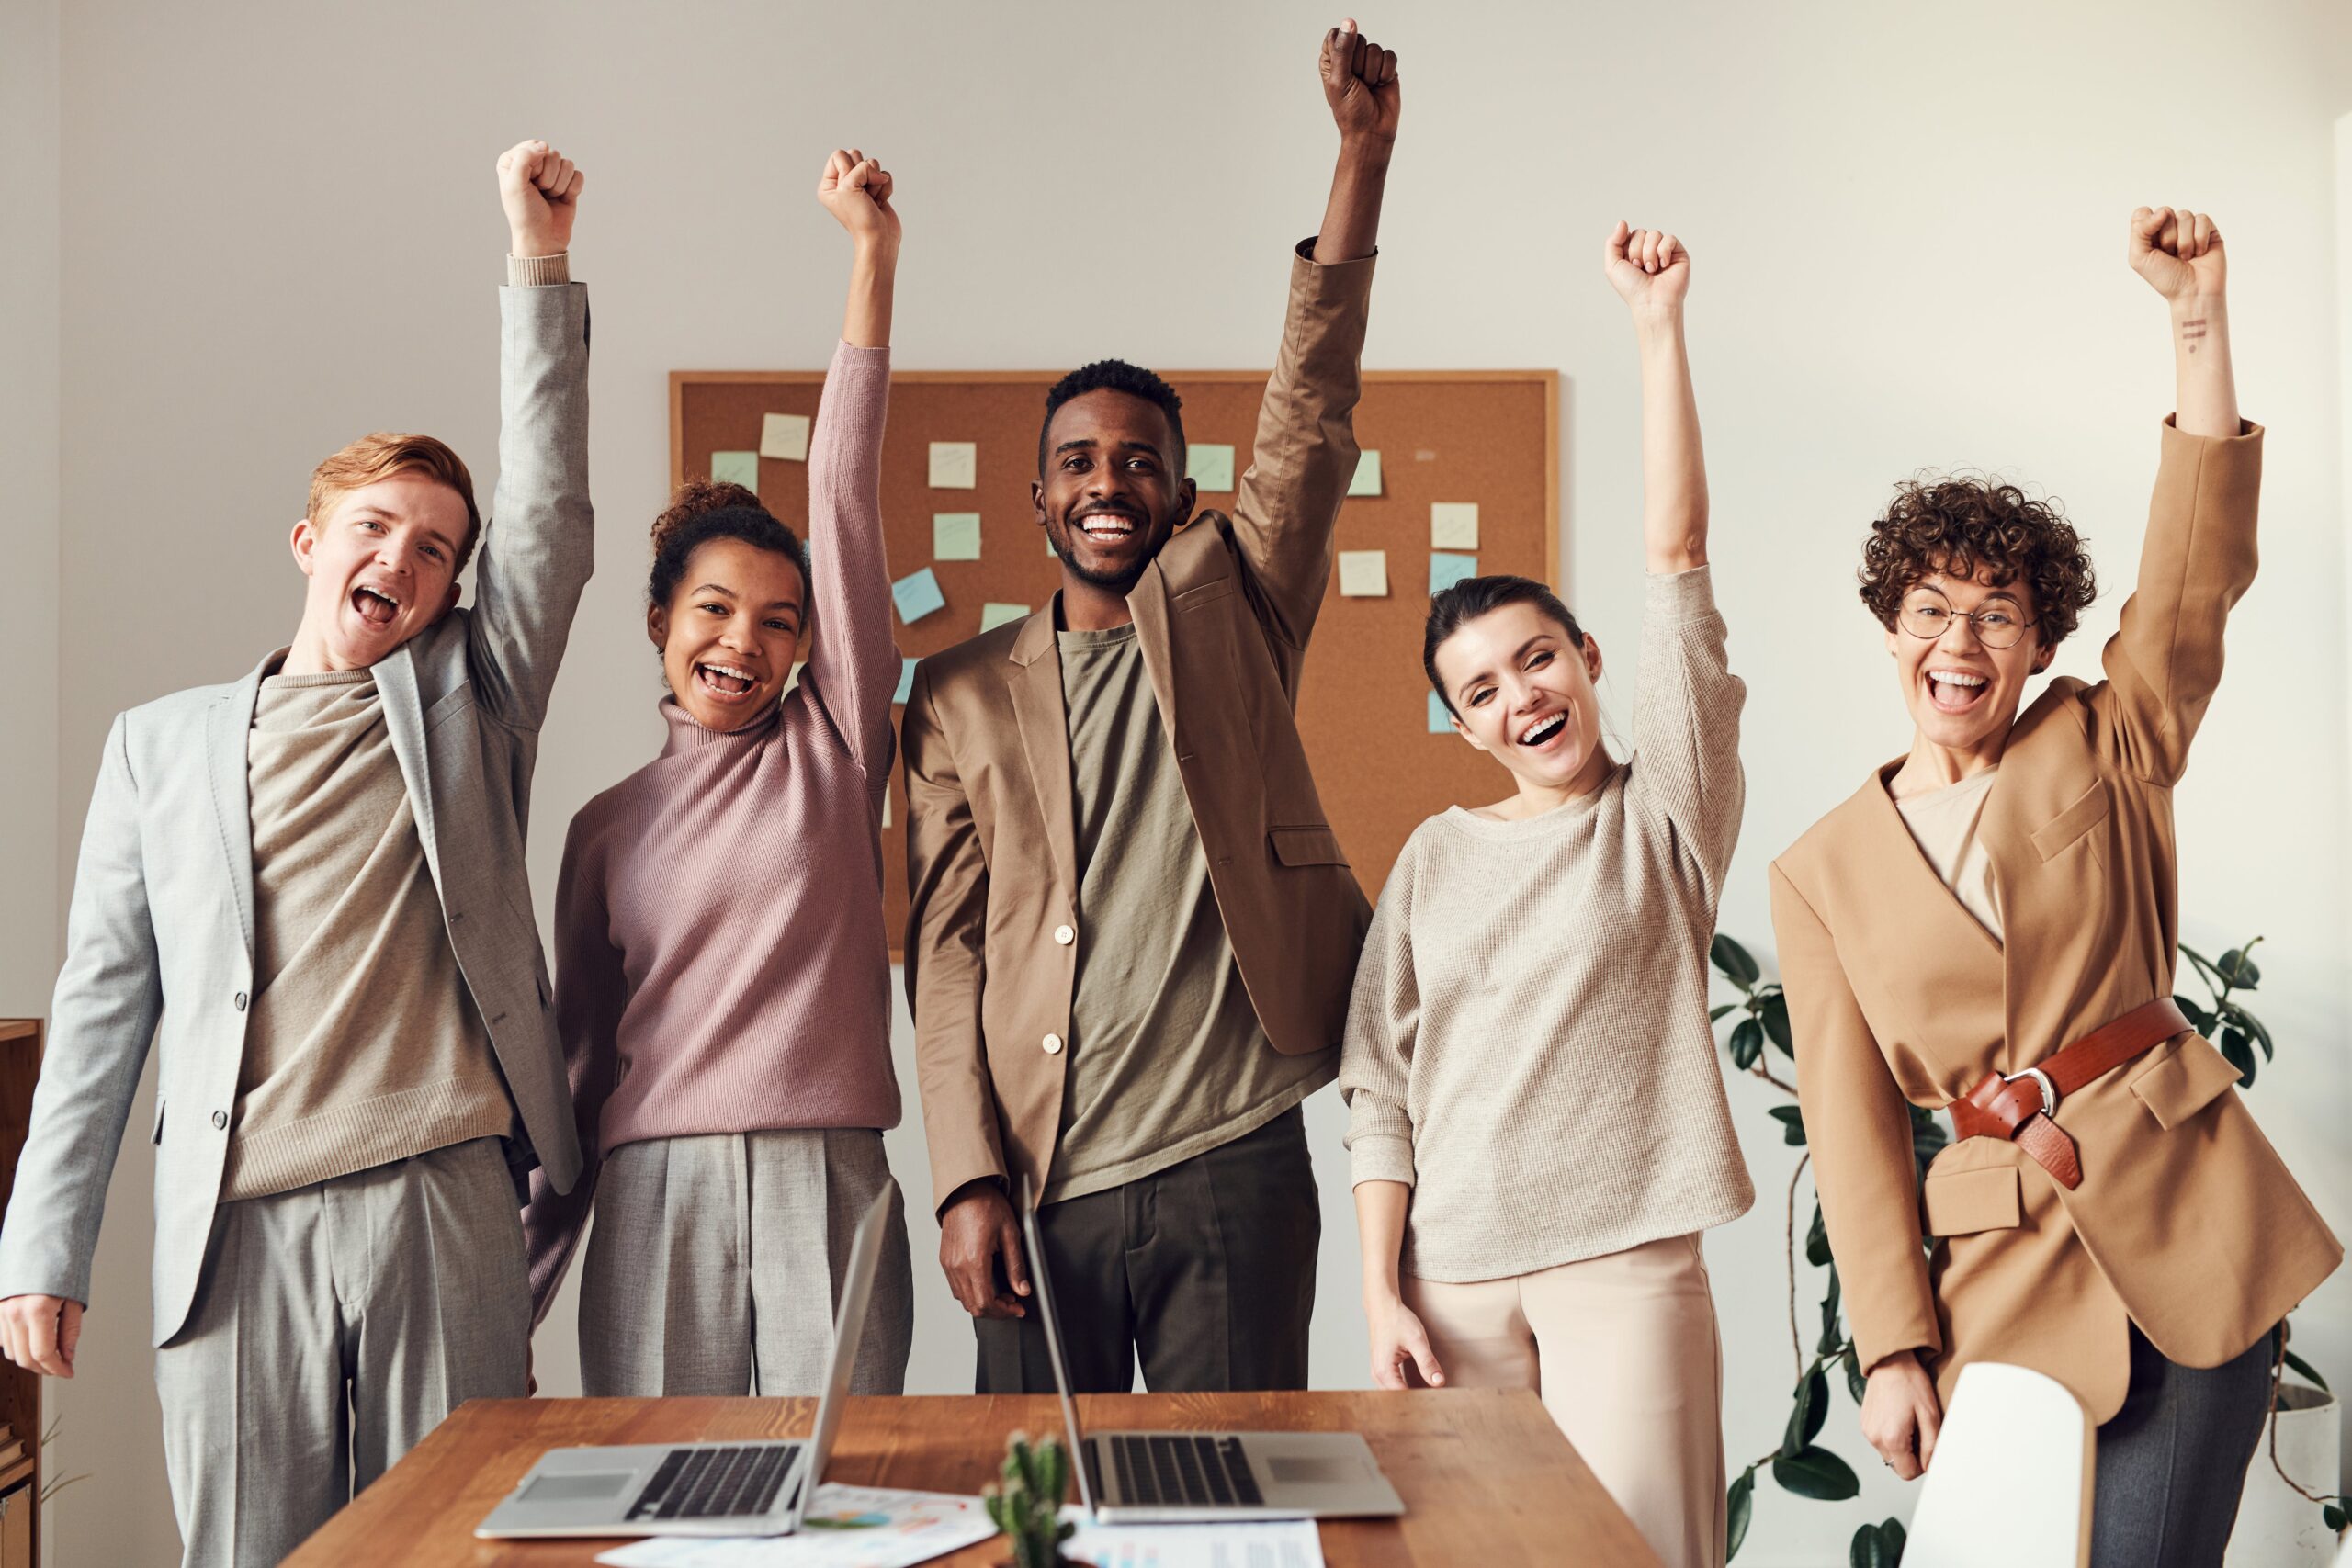 Learn how to give your employees encouragement by motivating your team.